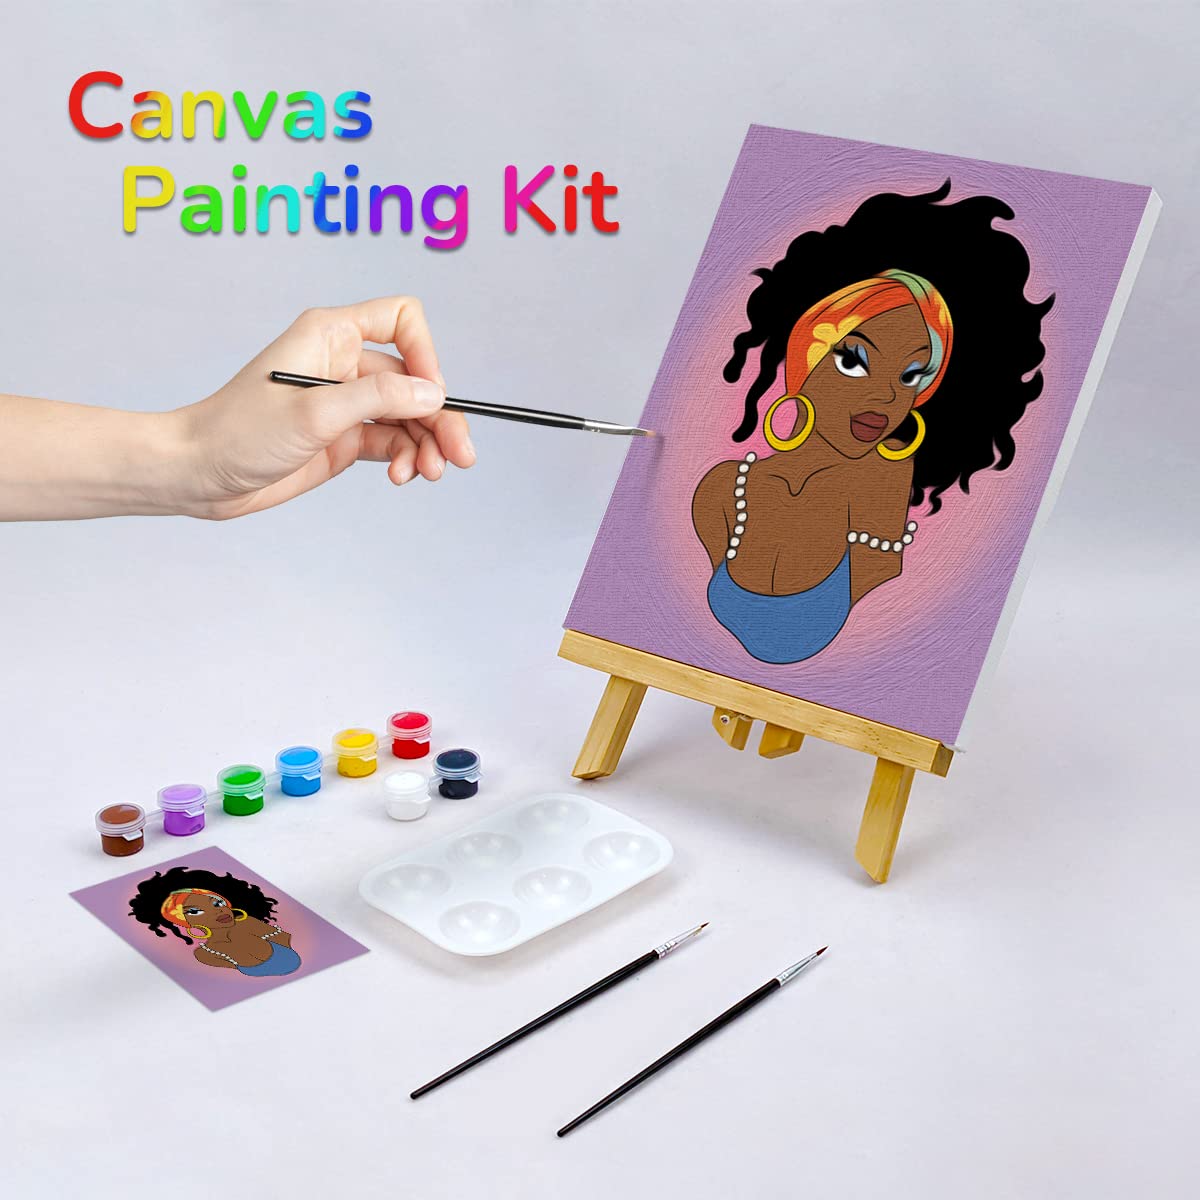 Paint and Sip, Pre-drawn Canvas, Pre-Sketched Canvas, Outlined Canvas, Sip and Paint, Paint Kit, Canvas Painting, DIY Paint Part